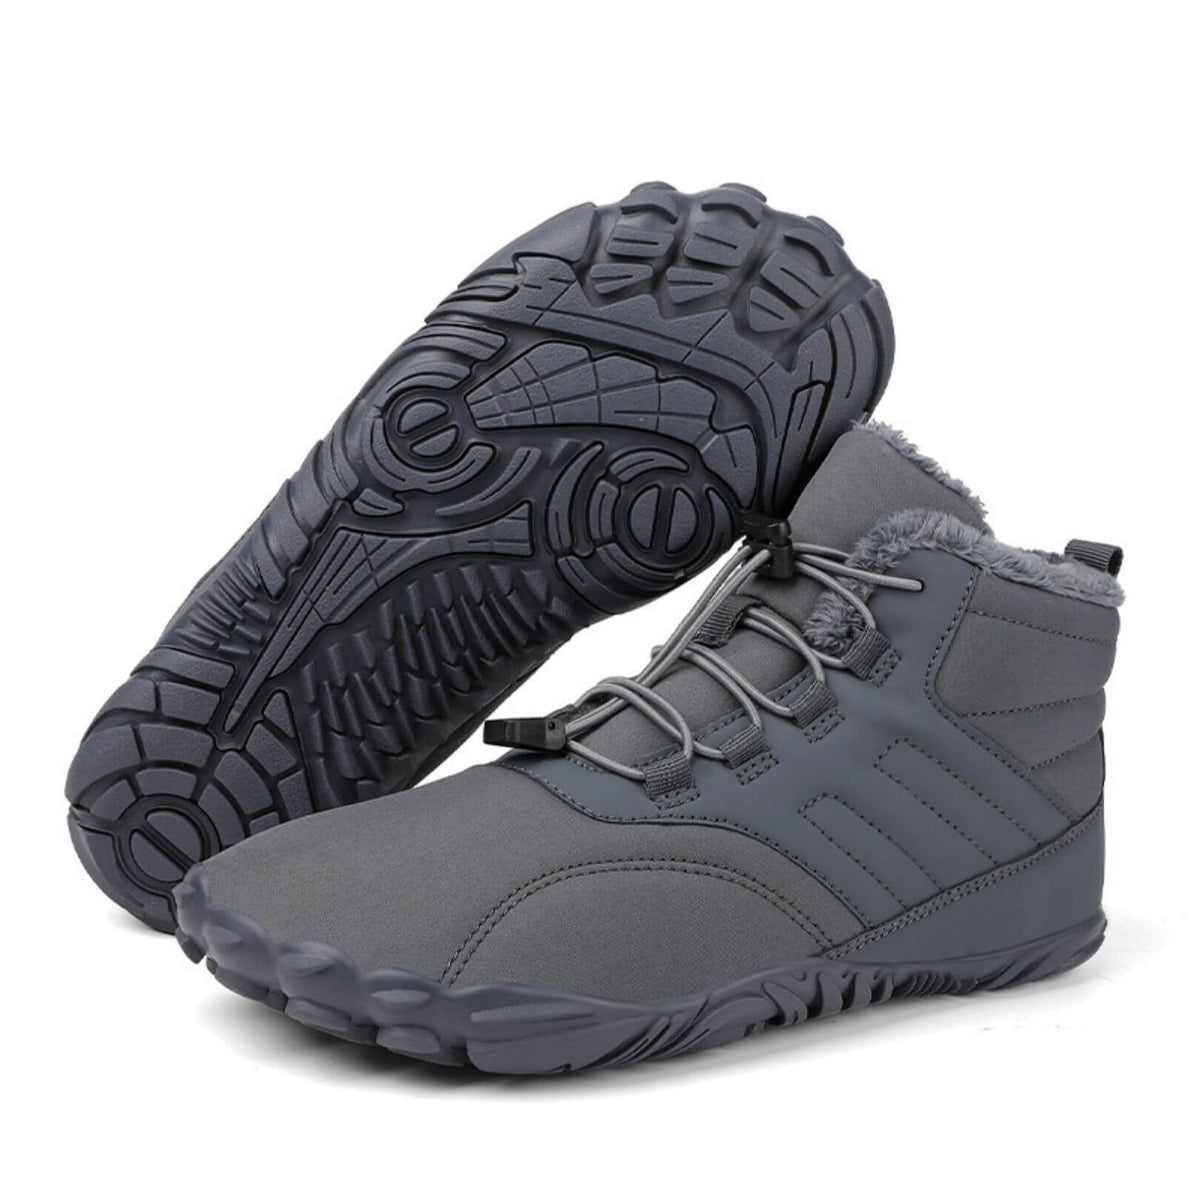 Purestep Winter Pro - Healthy, Warm & Water-Resistant Barefoot Shoes